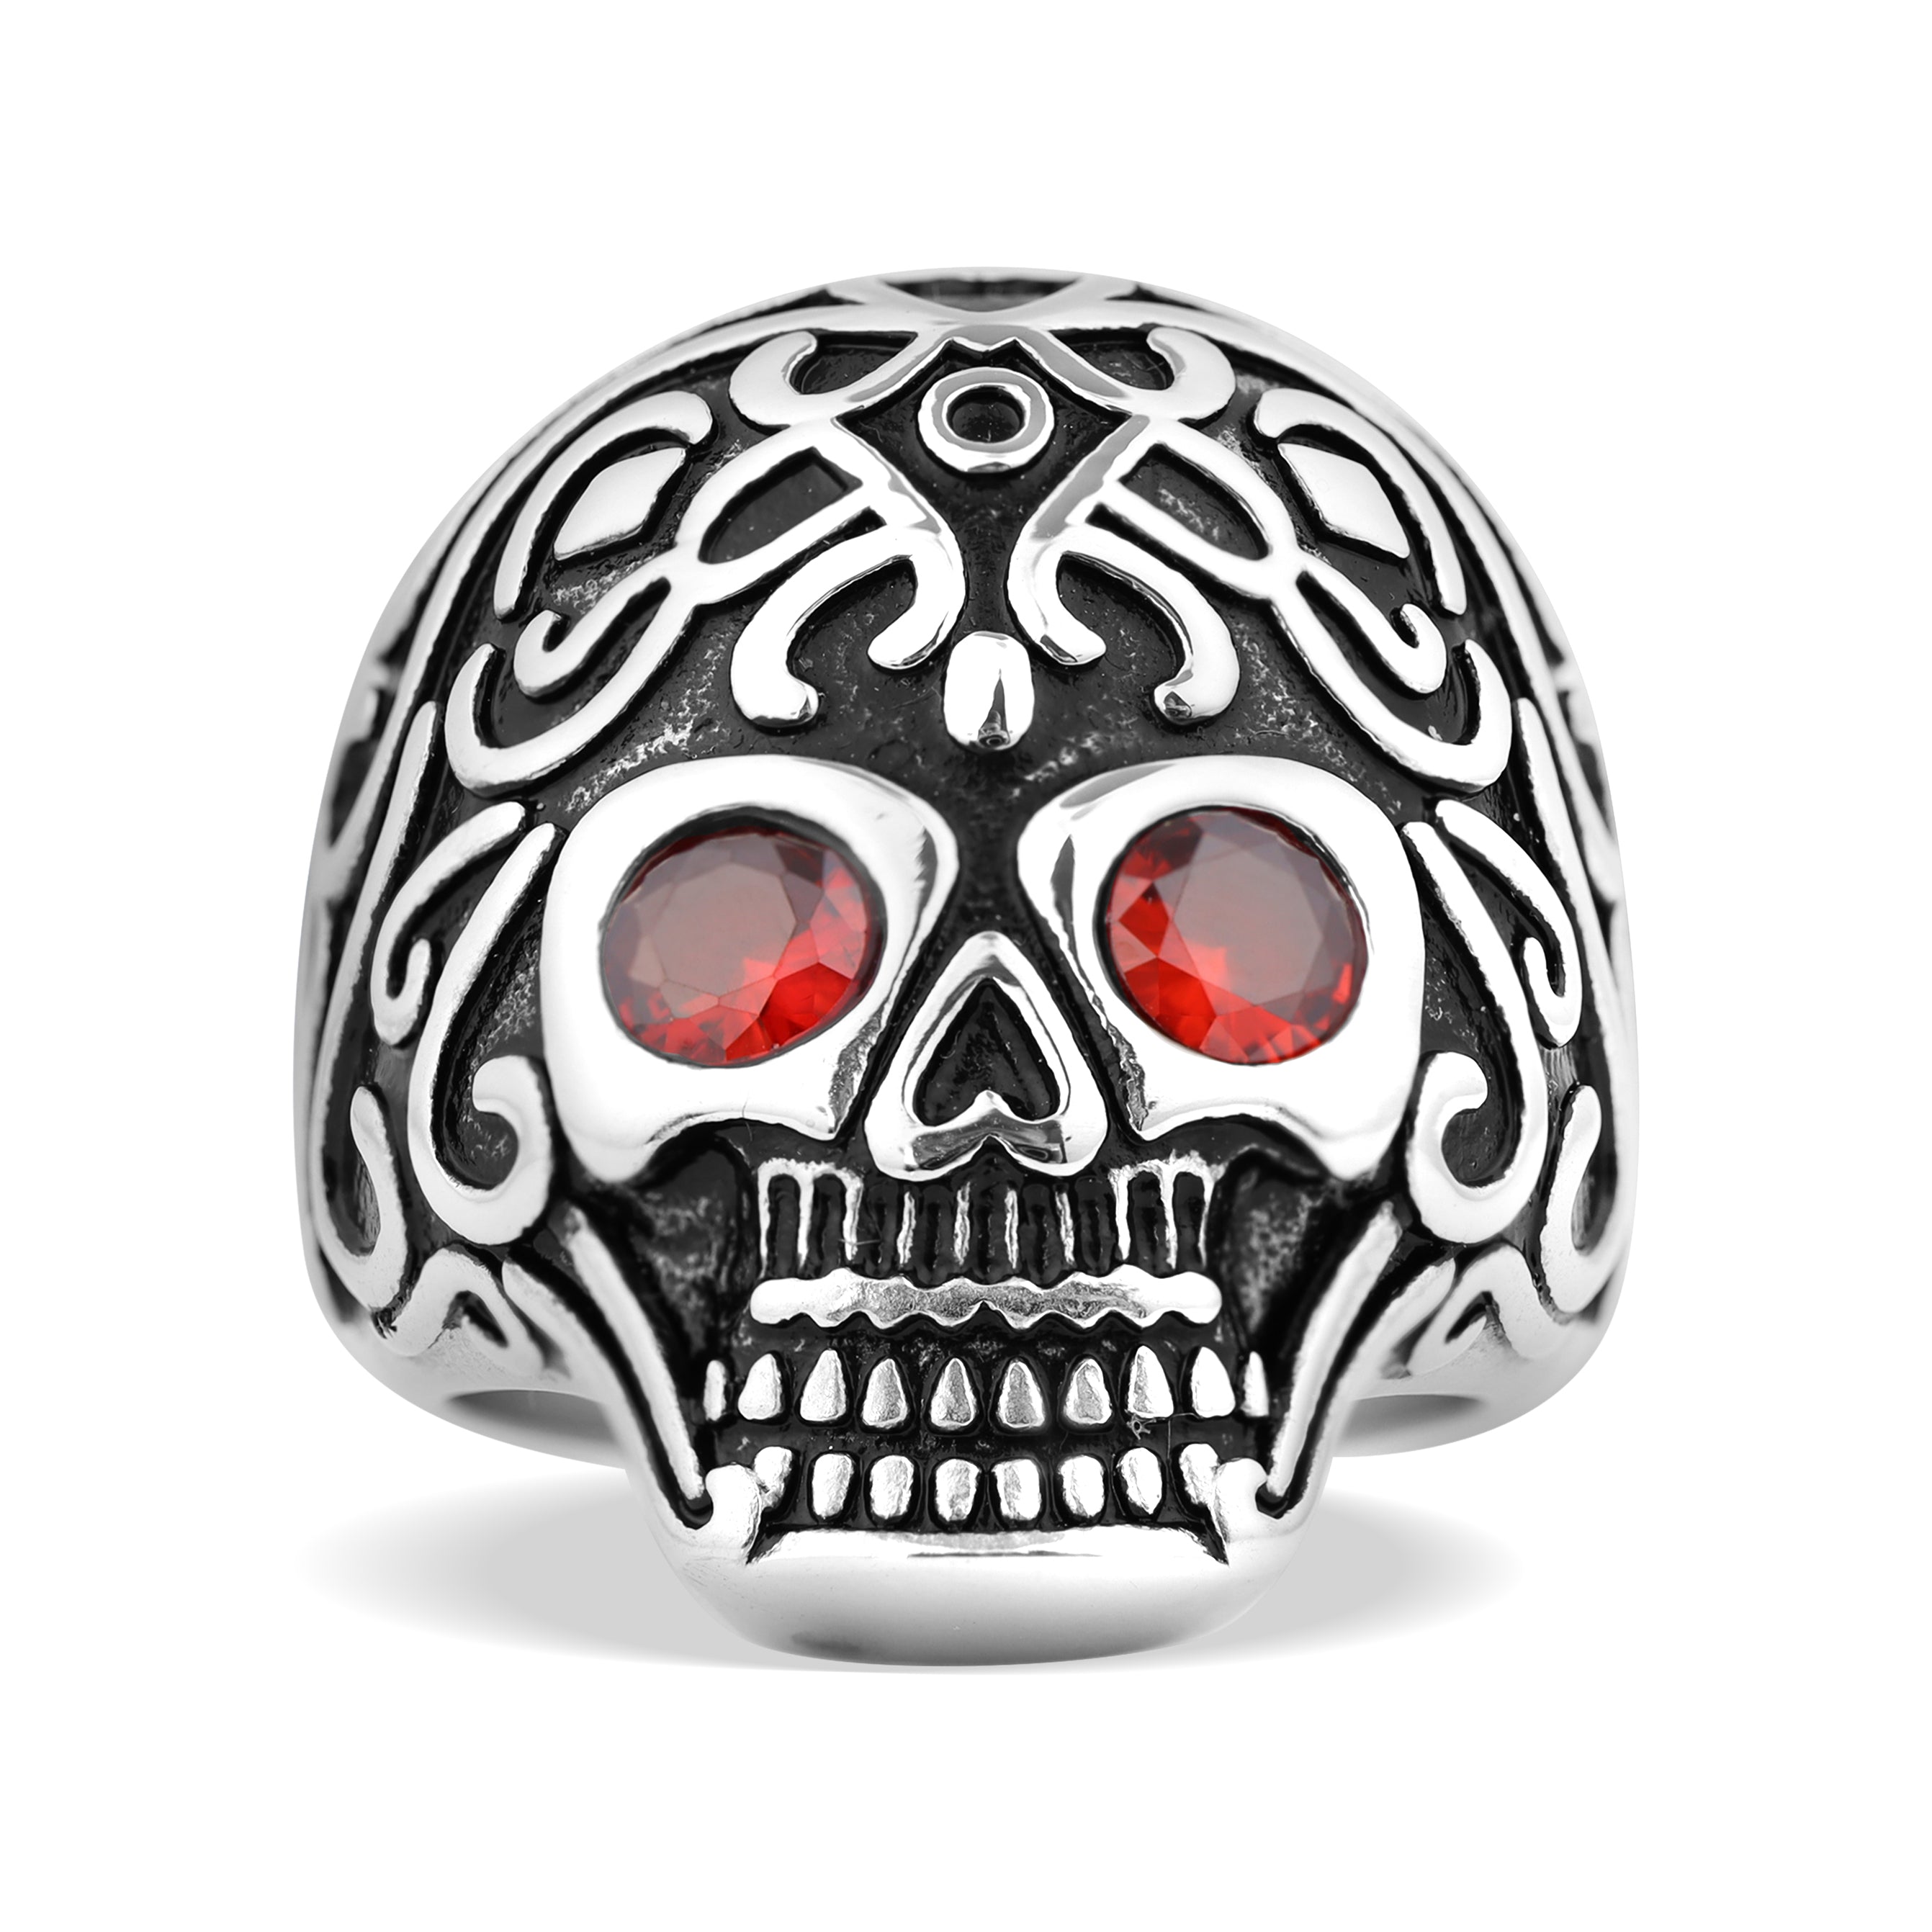 Detailed Skull With Red CZ Eyes Stainless Steel Polished Ring Size 11 / SCR0000